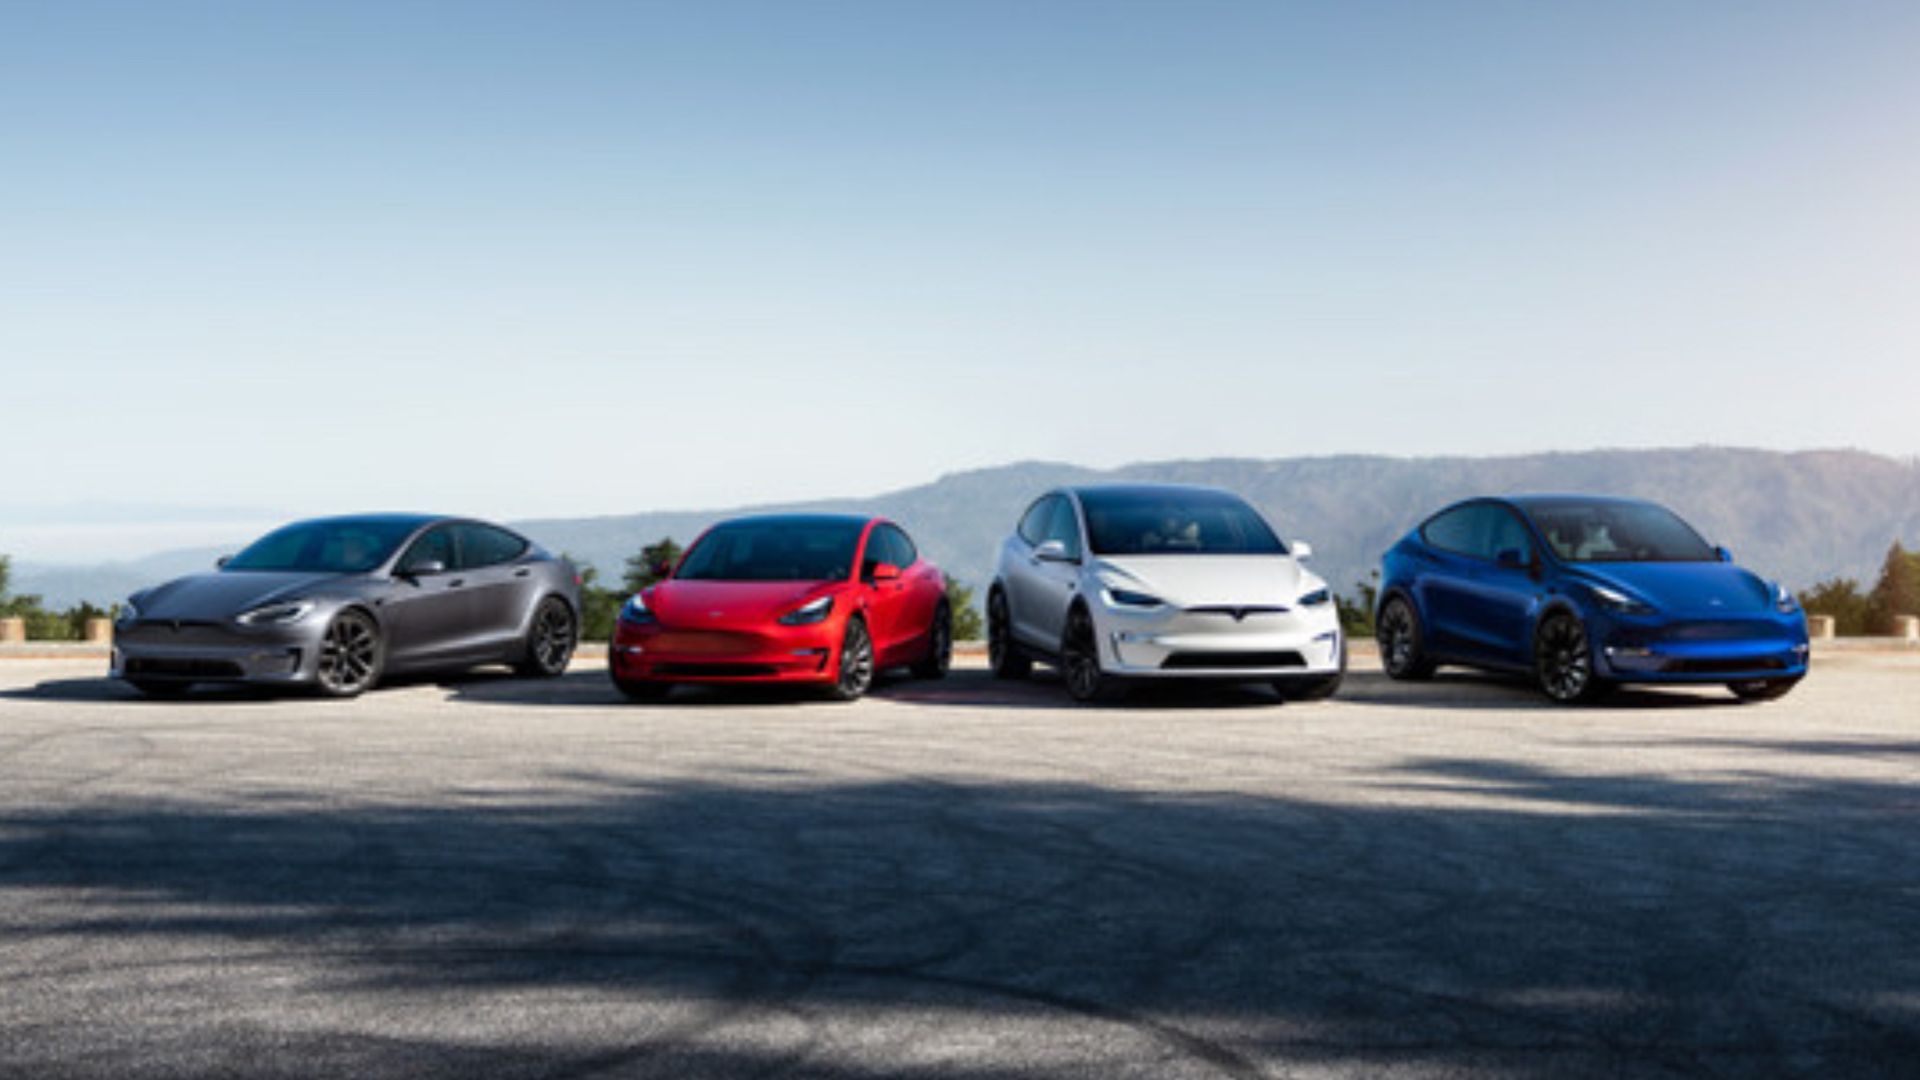 The Tesla Model S, Model 3, Model X, and Model Y lined up 